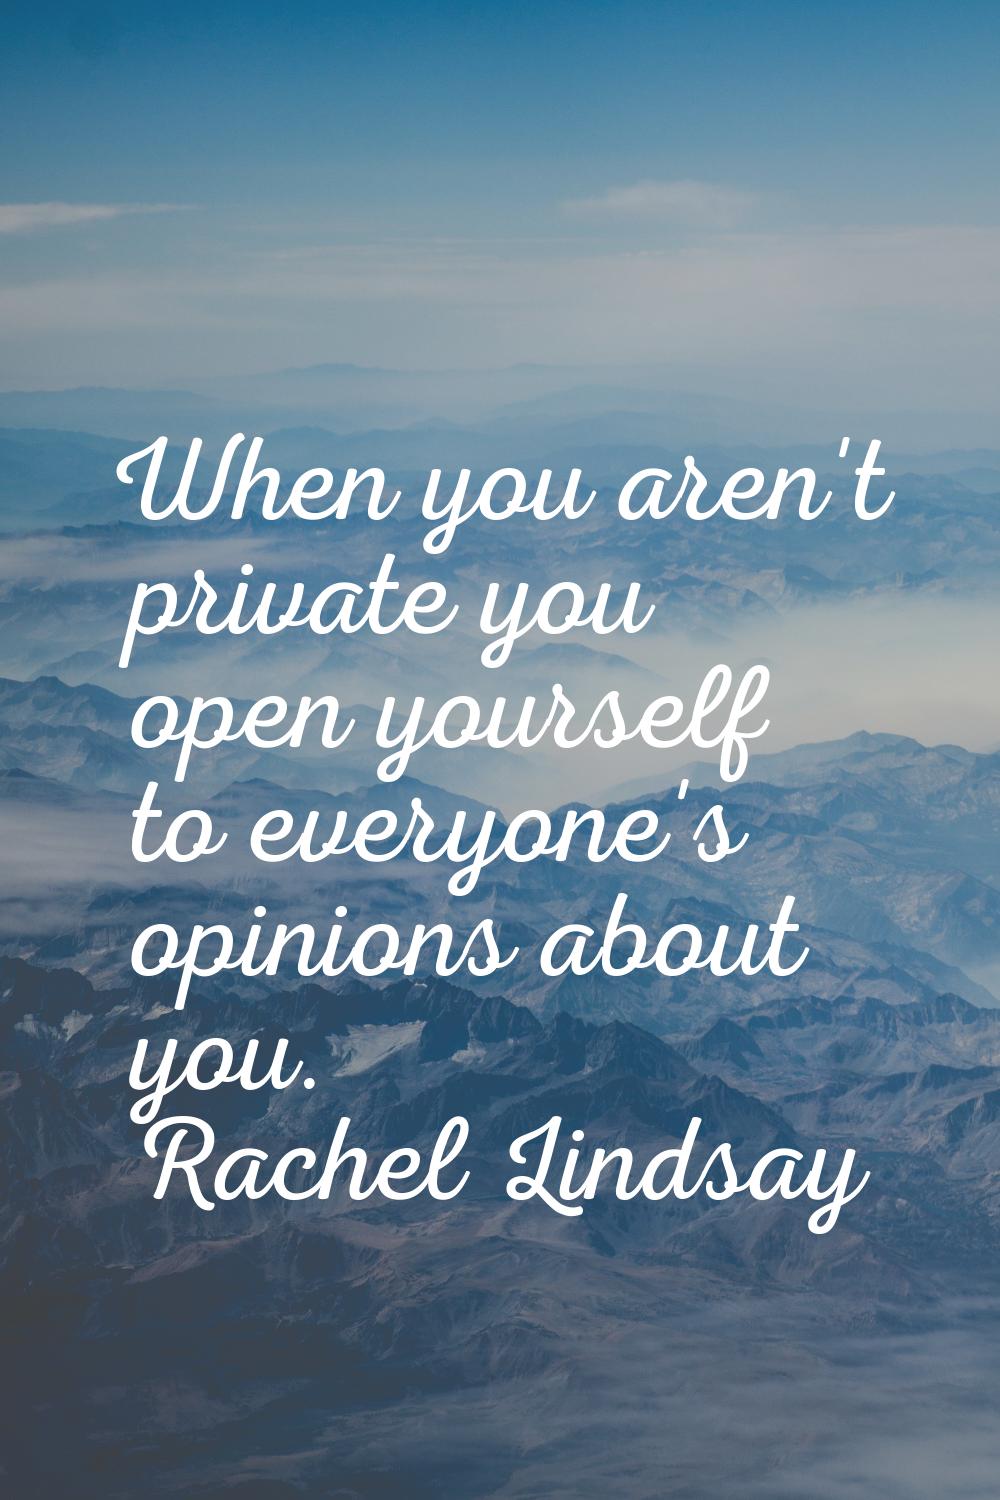 When you aren't private you open yourself to everyone's opinions about you.